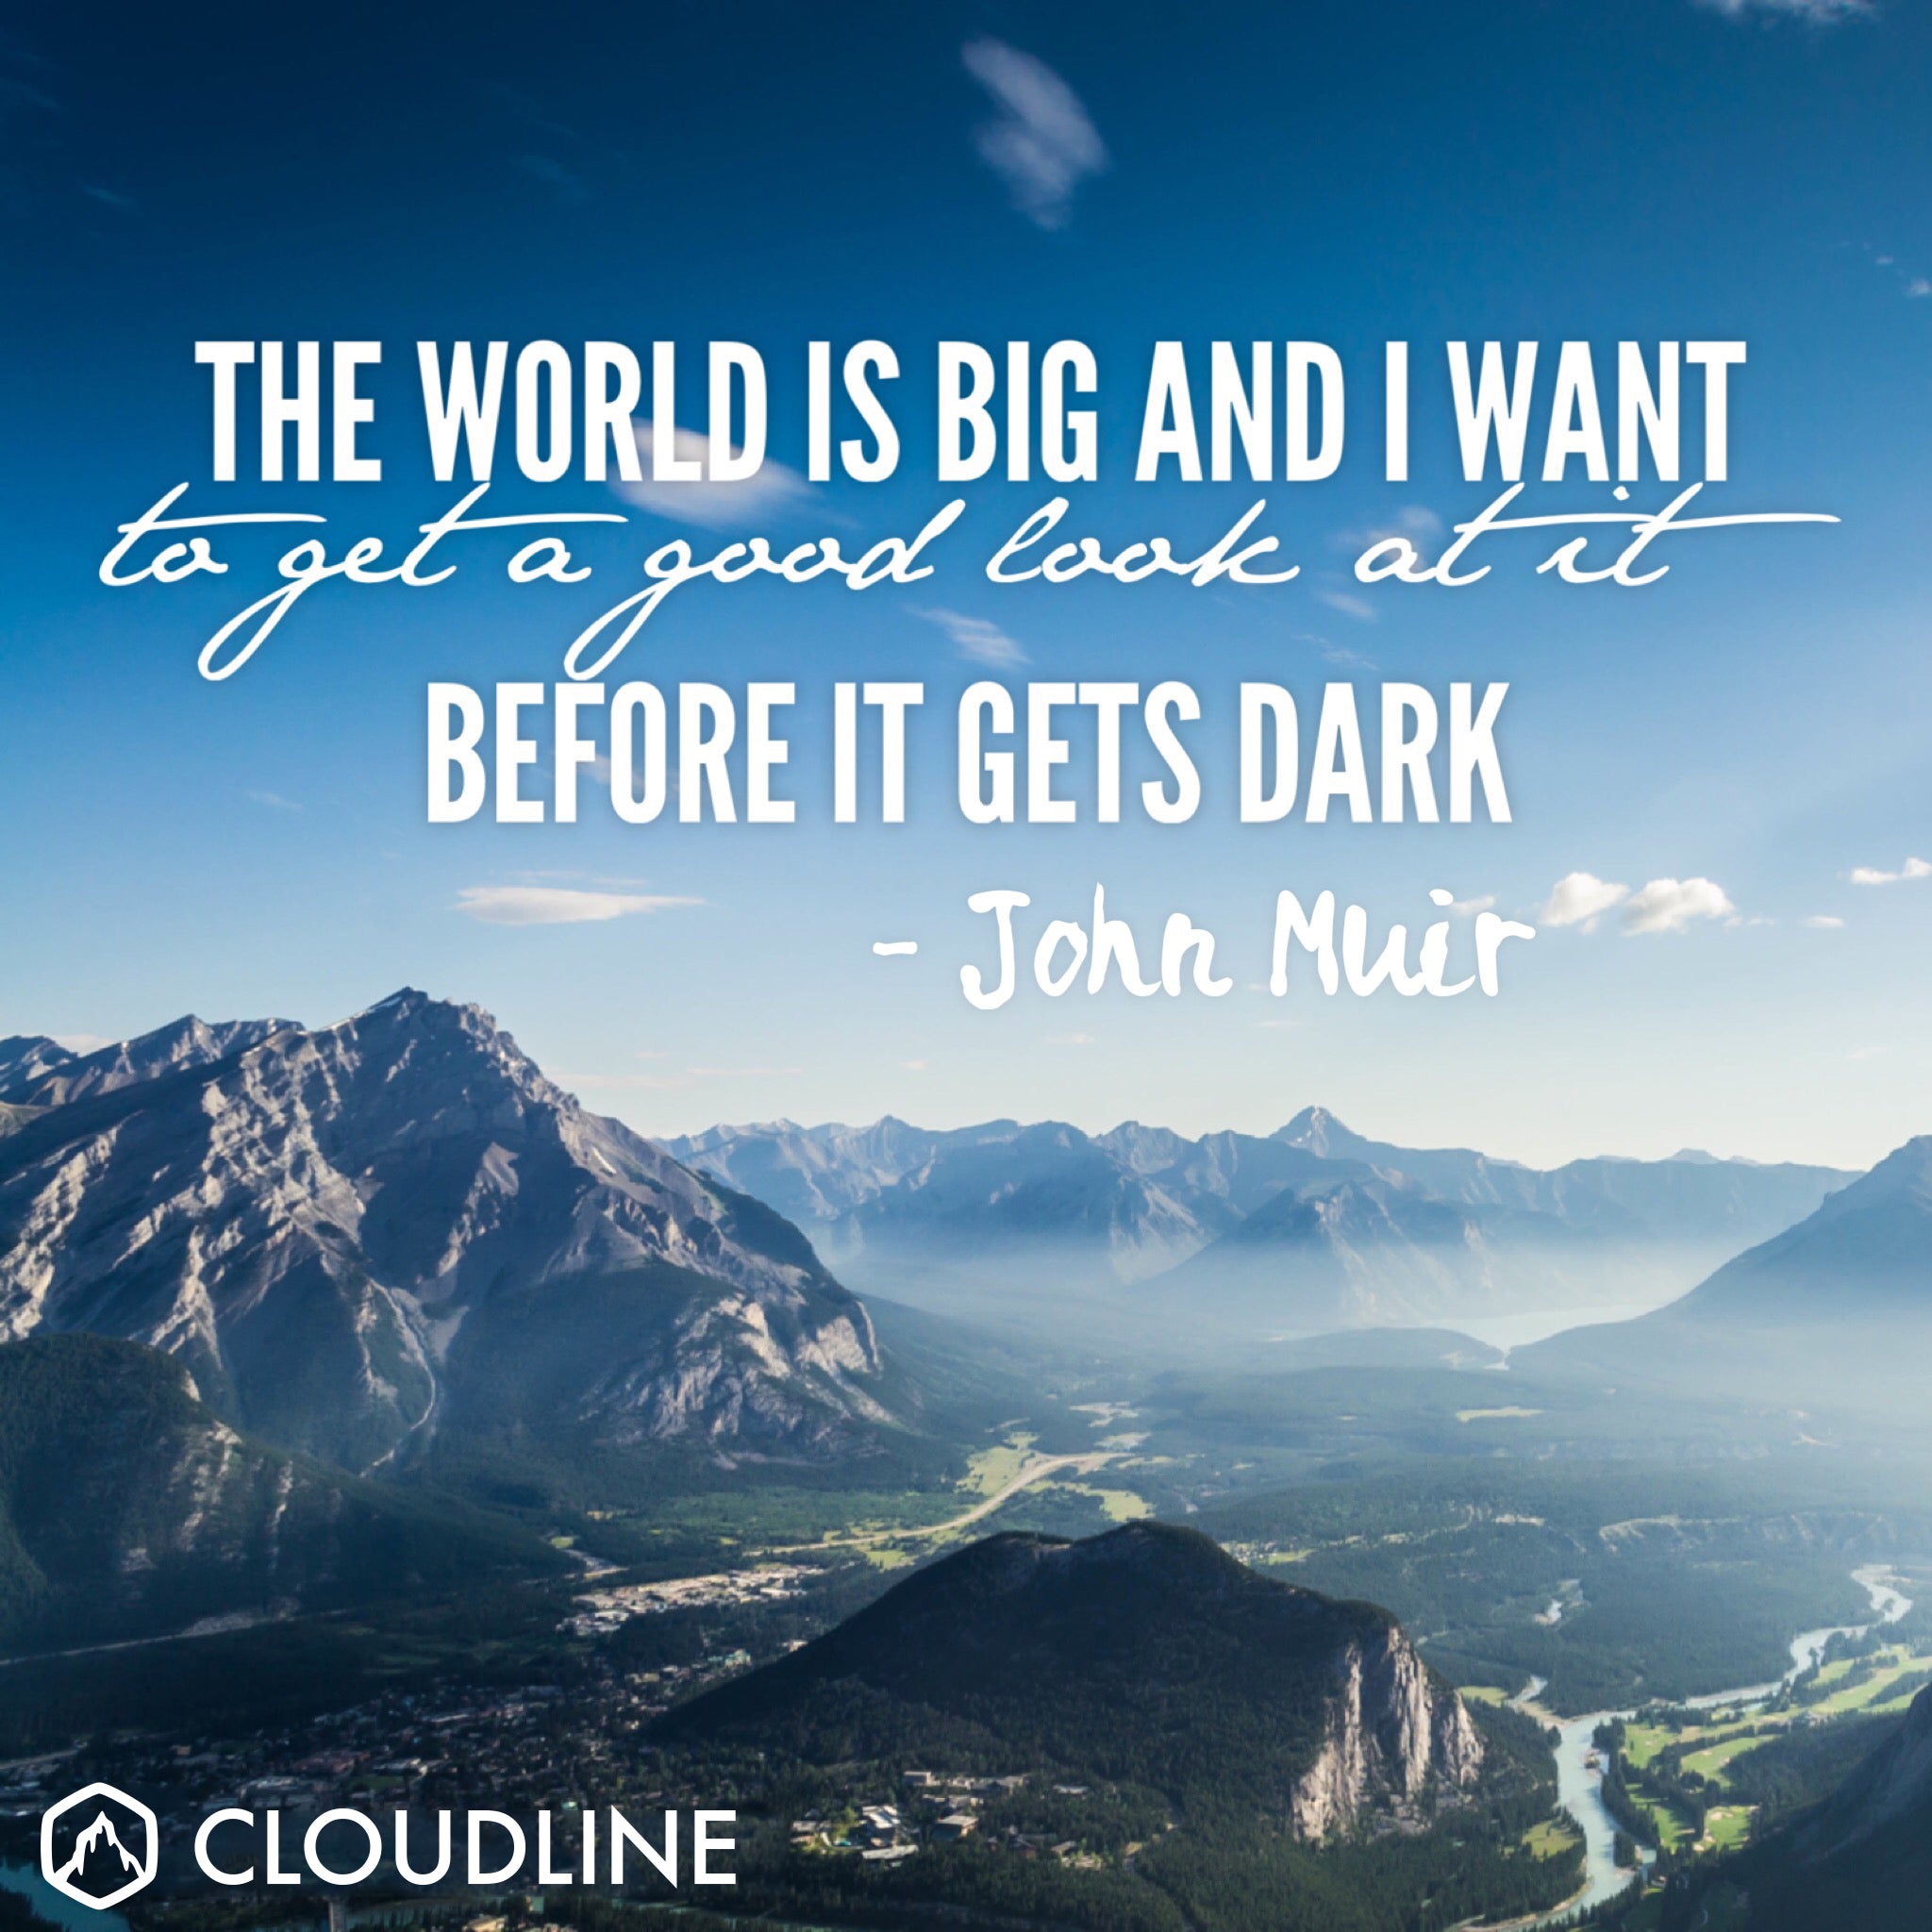 The world is big and I want to have a good look at it before it gets dark.  - Inspirational Quotes